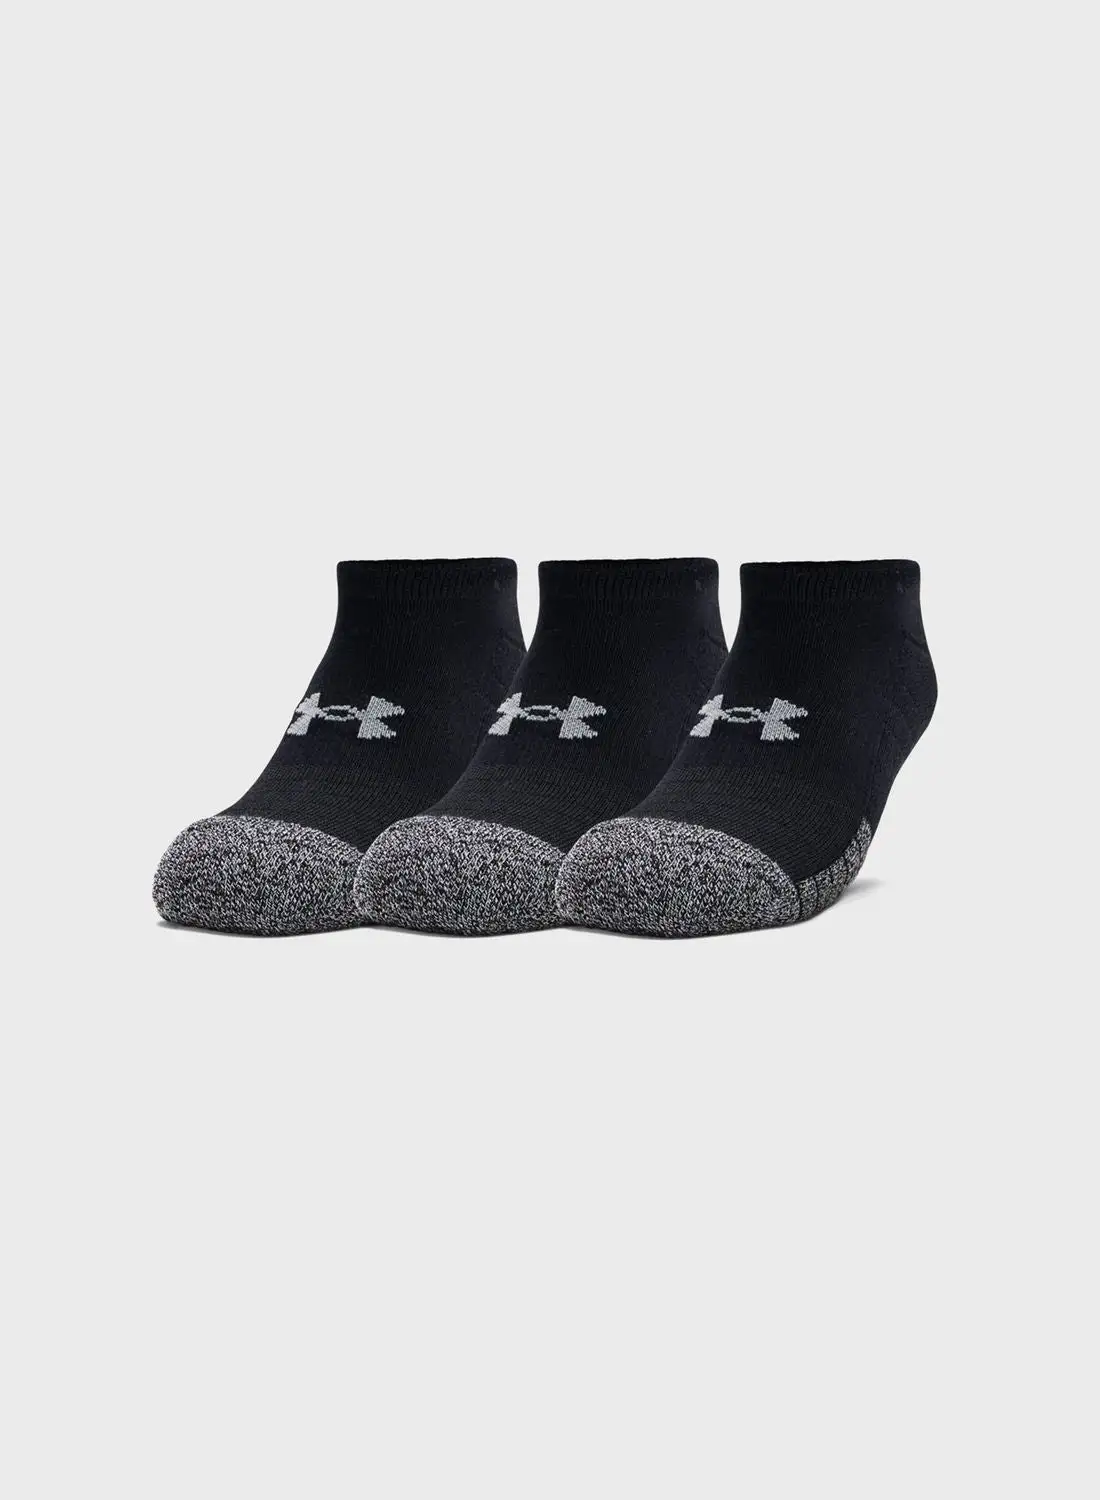 UNDER ARMOUR Performance Tech No Show Socks (Pack Of 3)